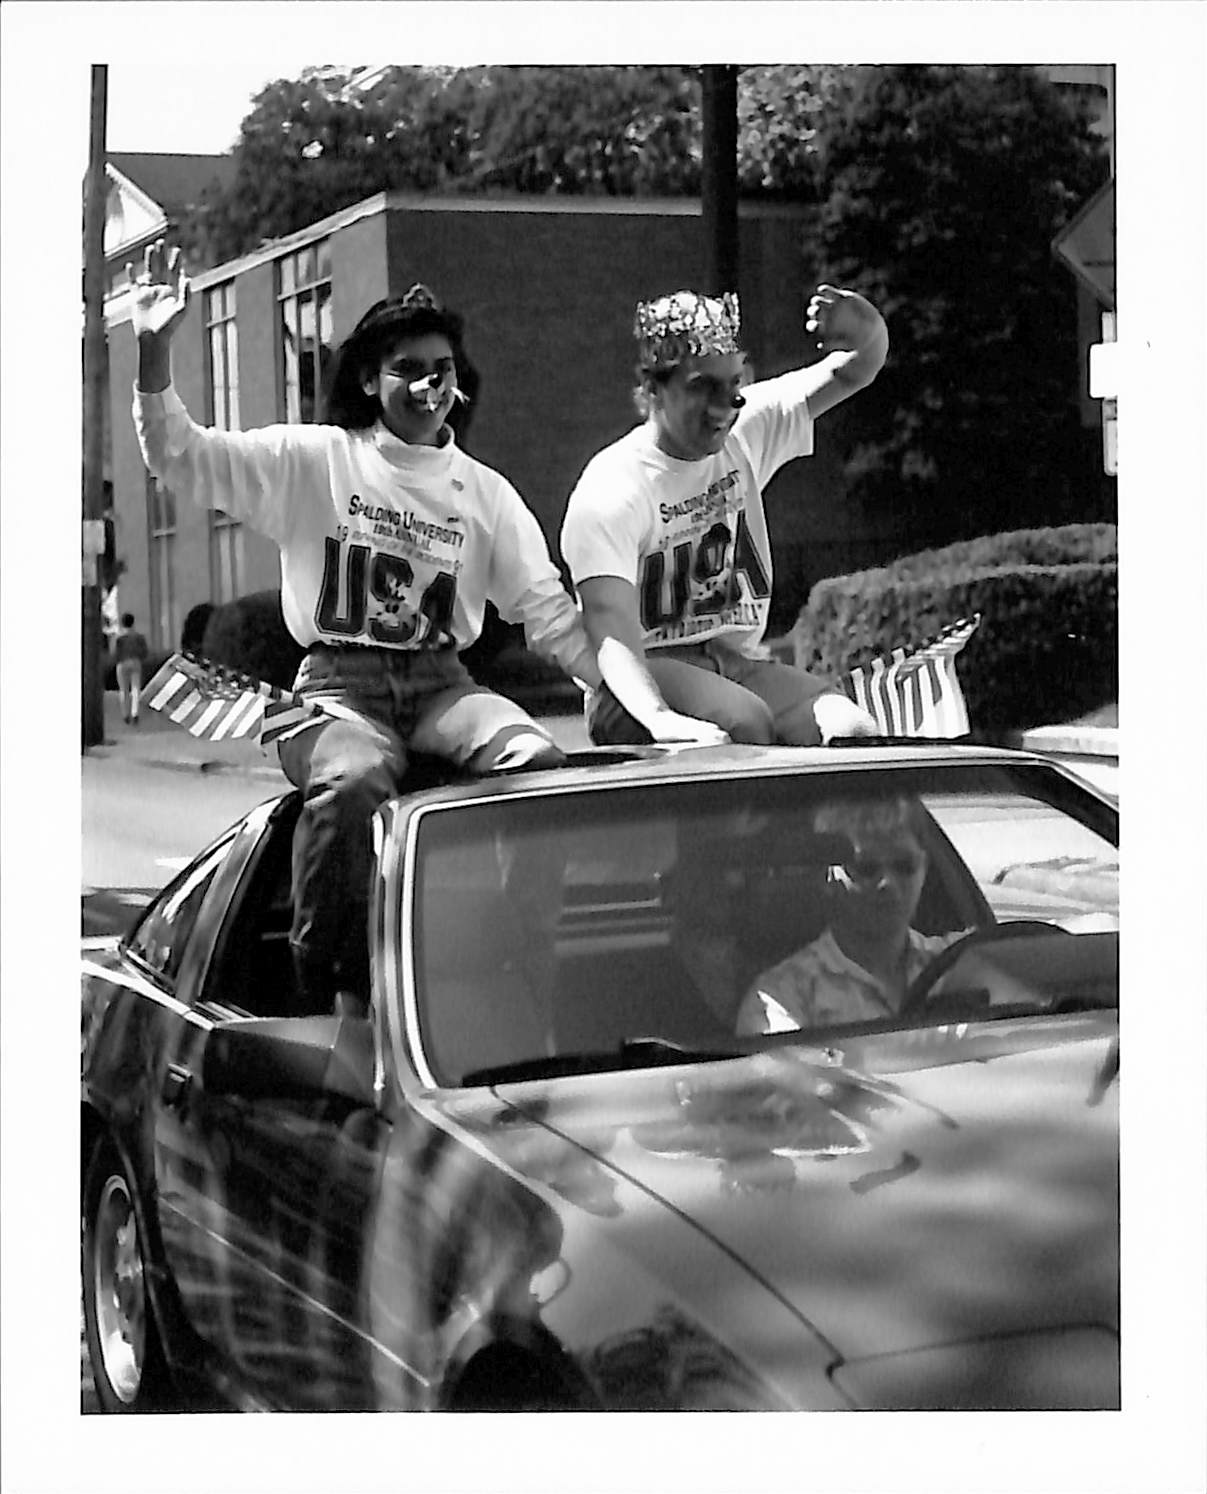 Mr. & Ms. Rodent waving from car during parade